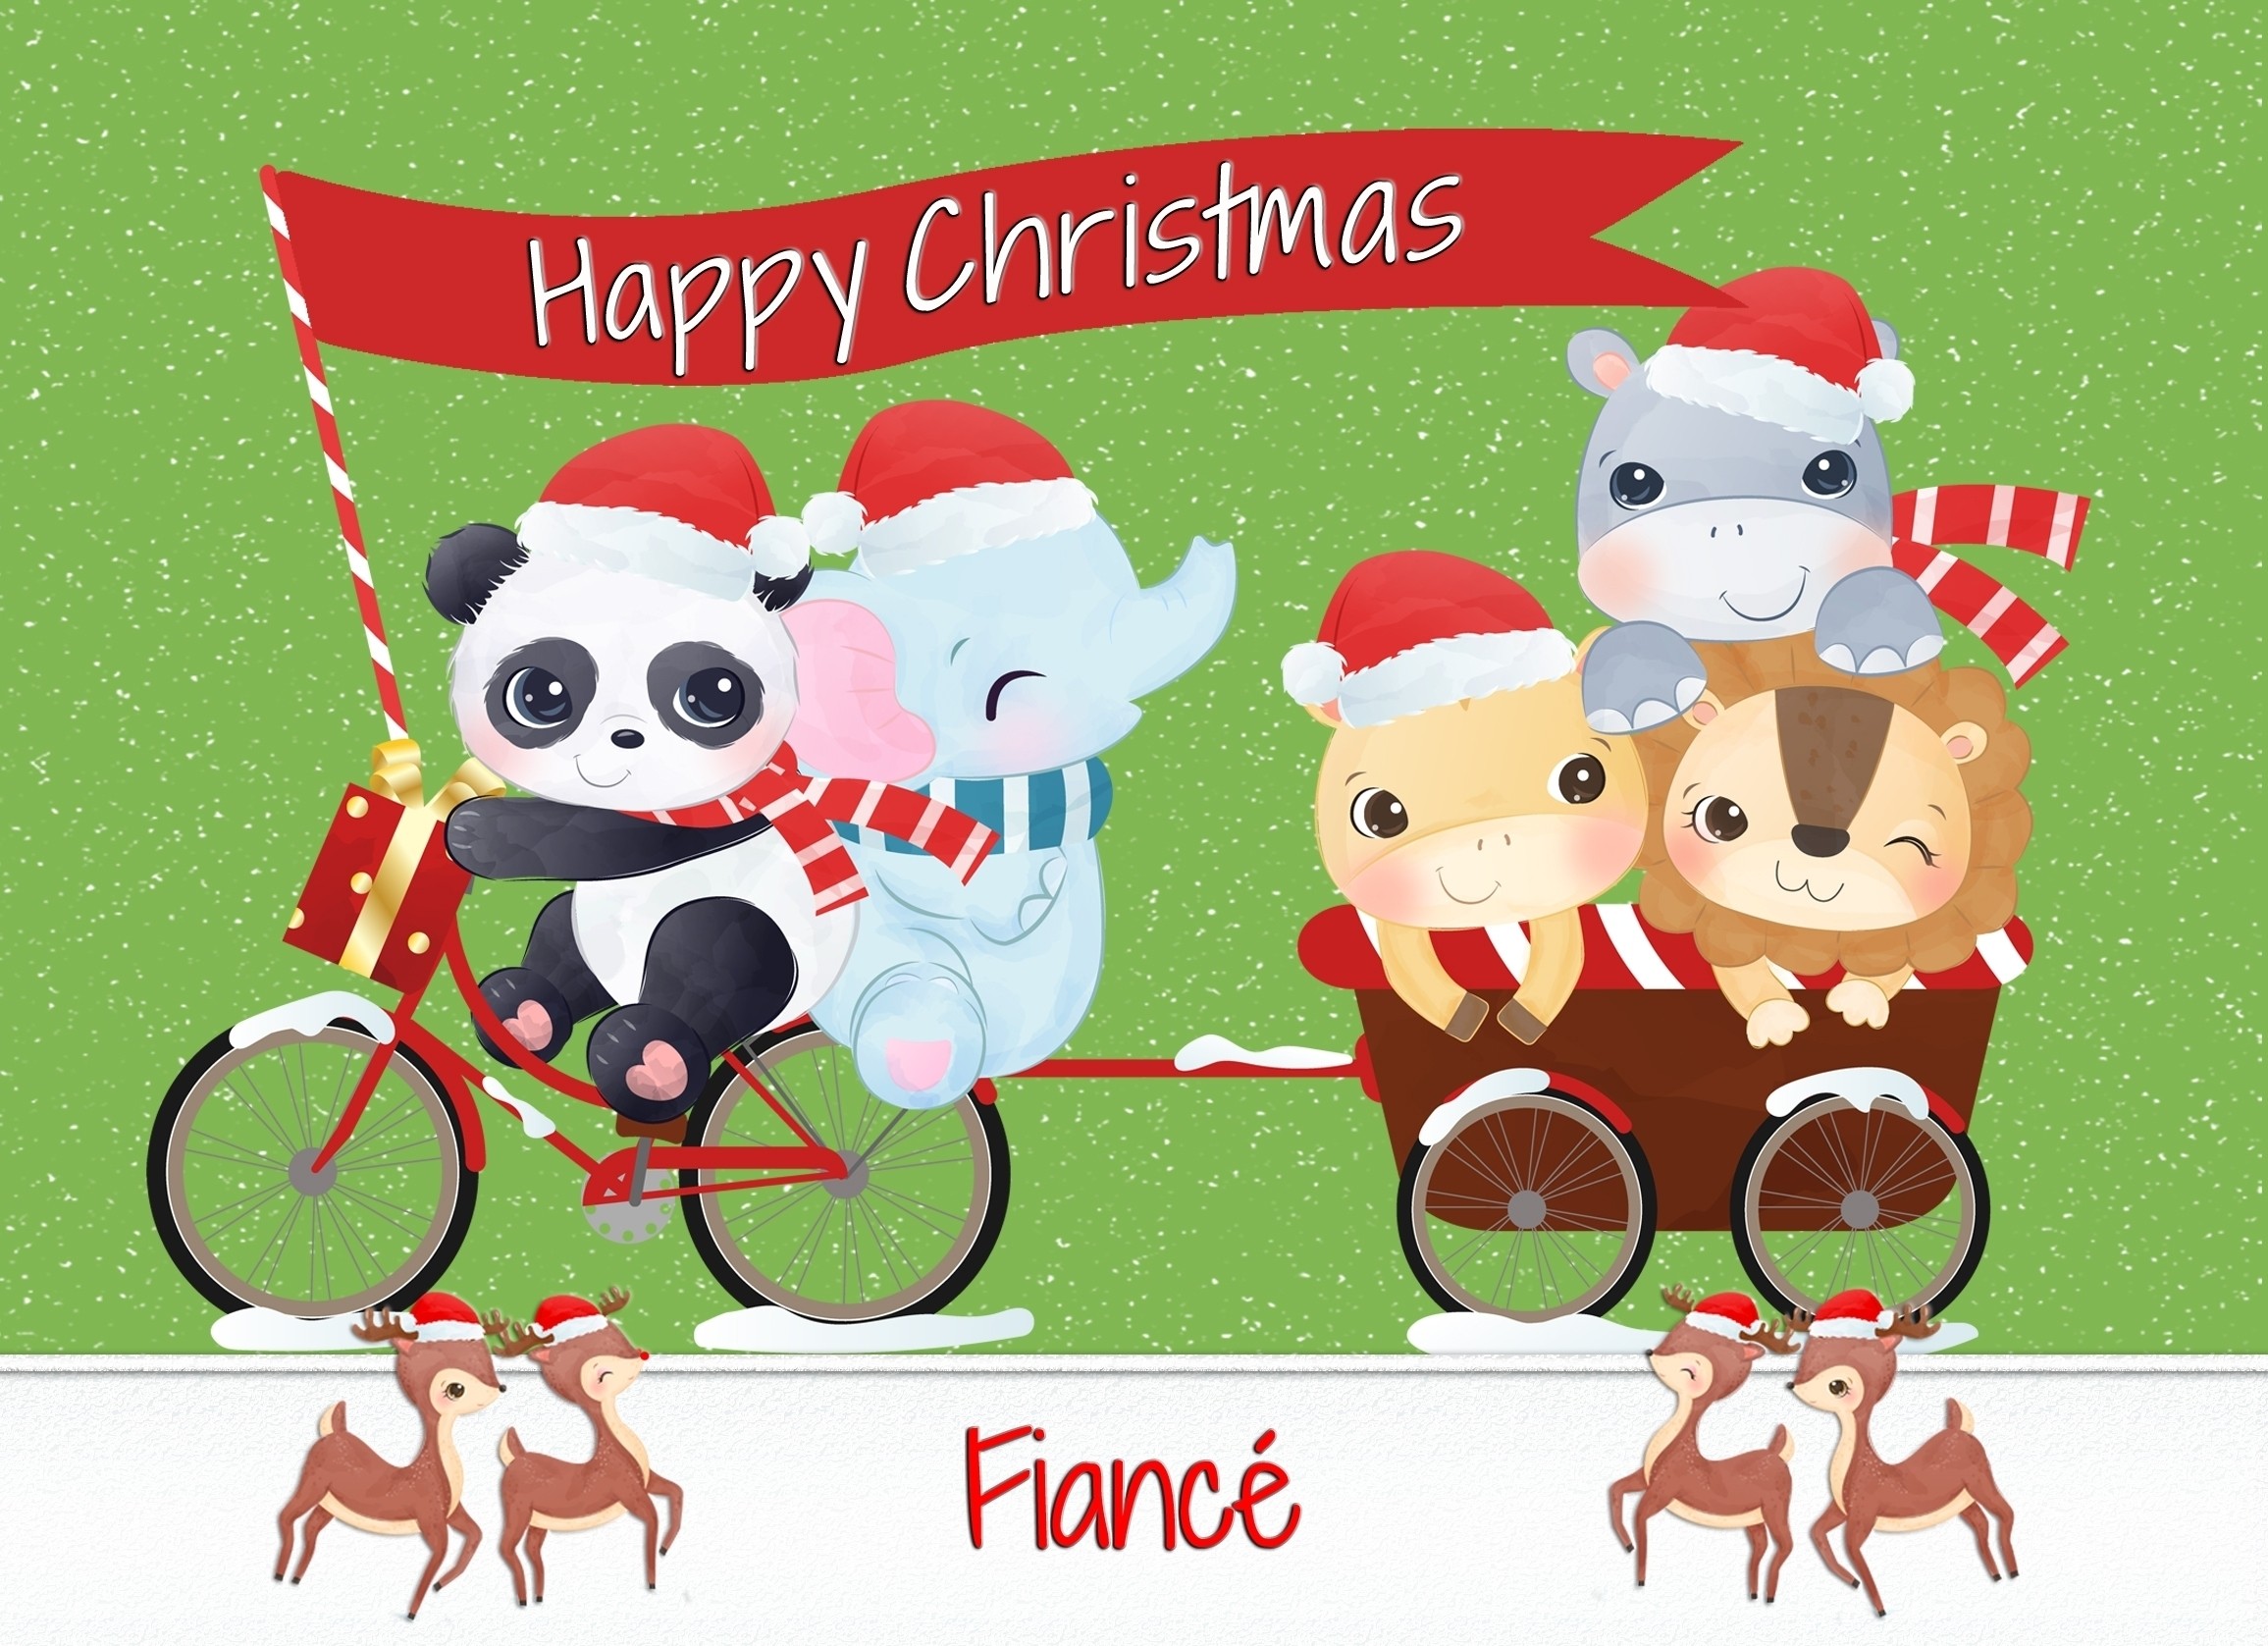 Christmas Card For Fiance (Green Animals)